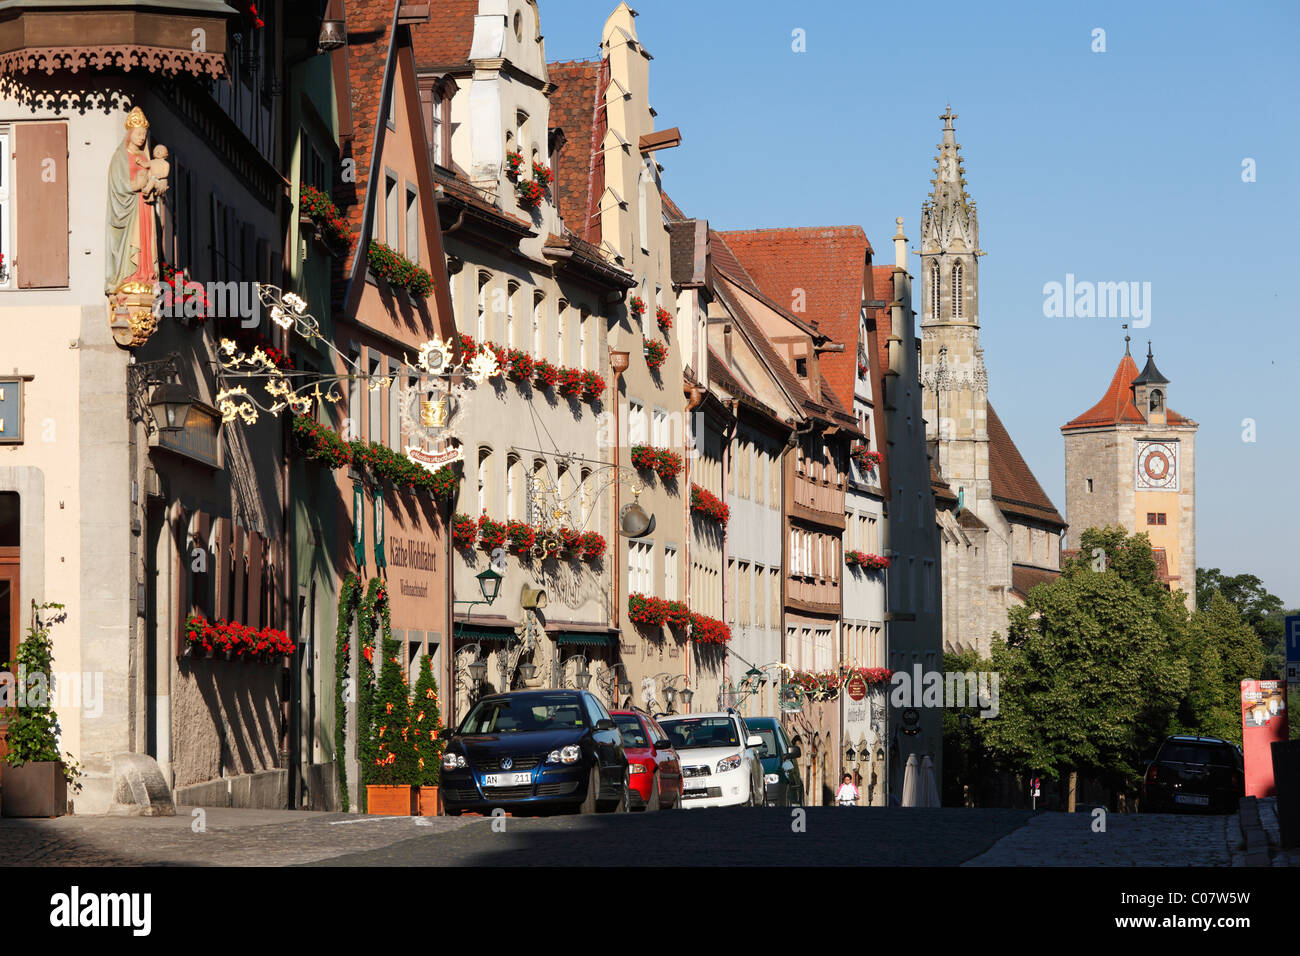 Herrngasse street, Franciscan church and Burgturm tower, Rothenburg ob der Tauber, Romantic Road, Middle Franconia, Franconia Stock Photo